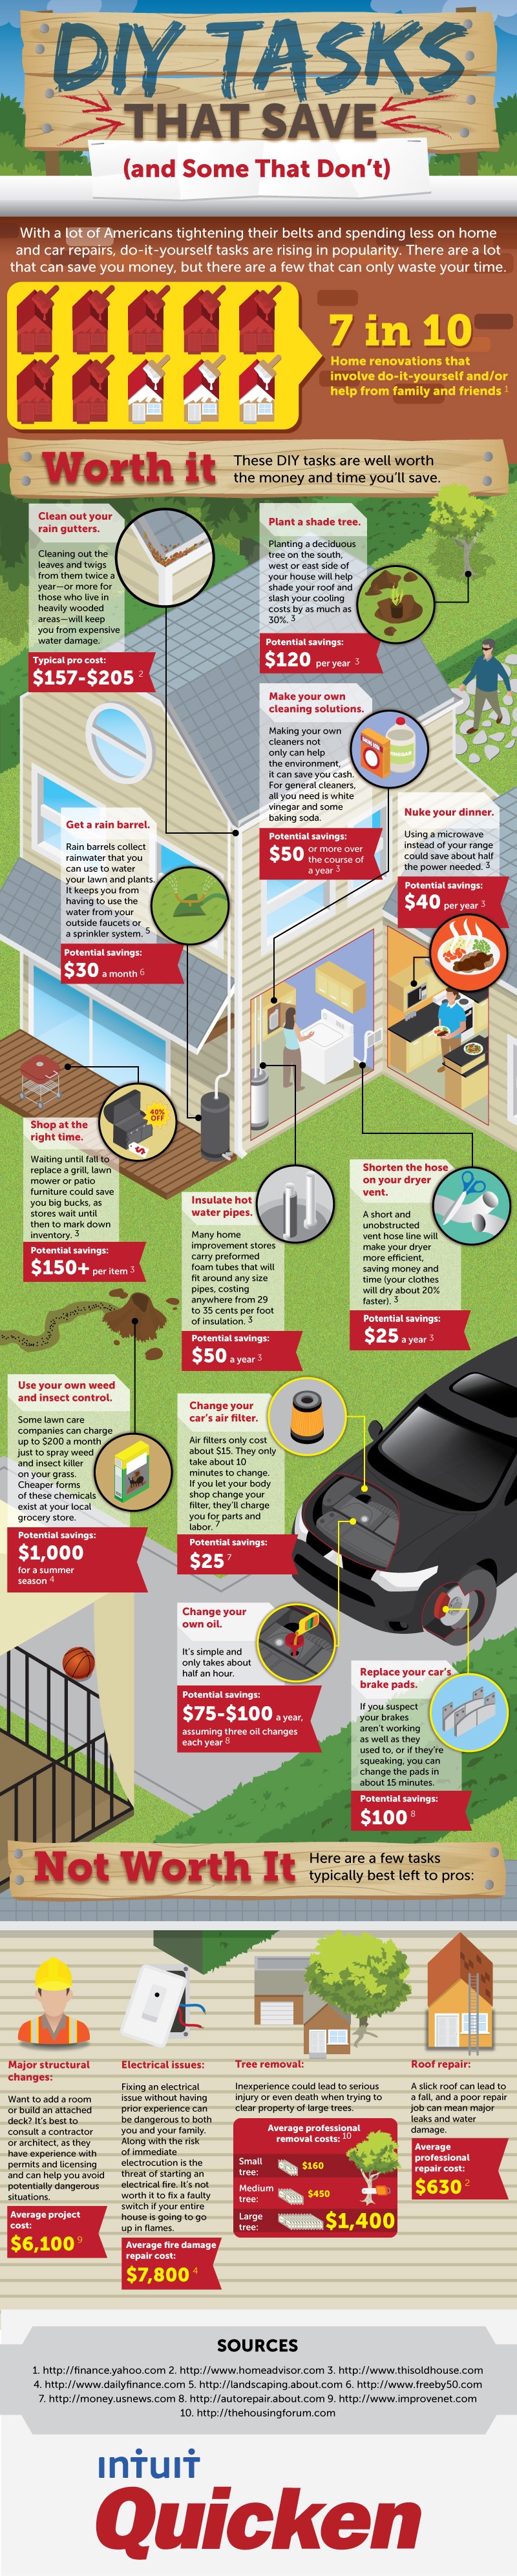 DIY Tasks that Save: And Some that Don’t [Infographic]